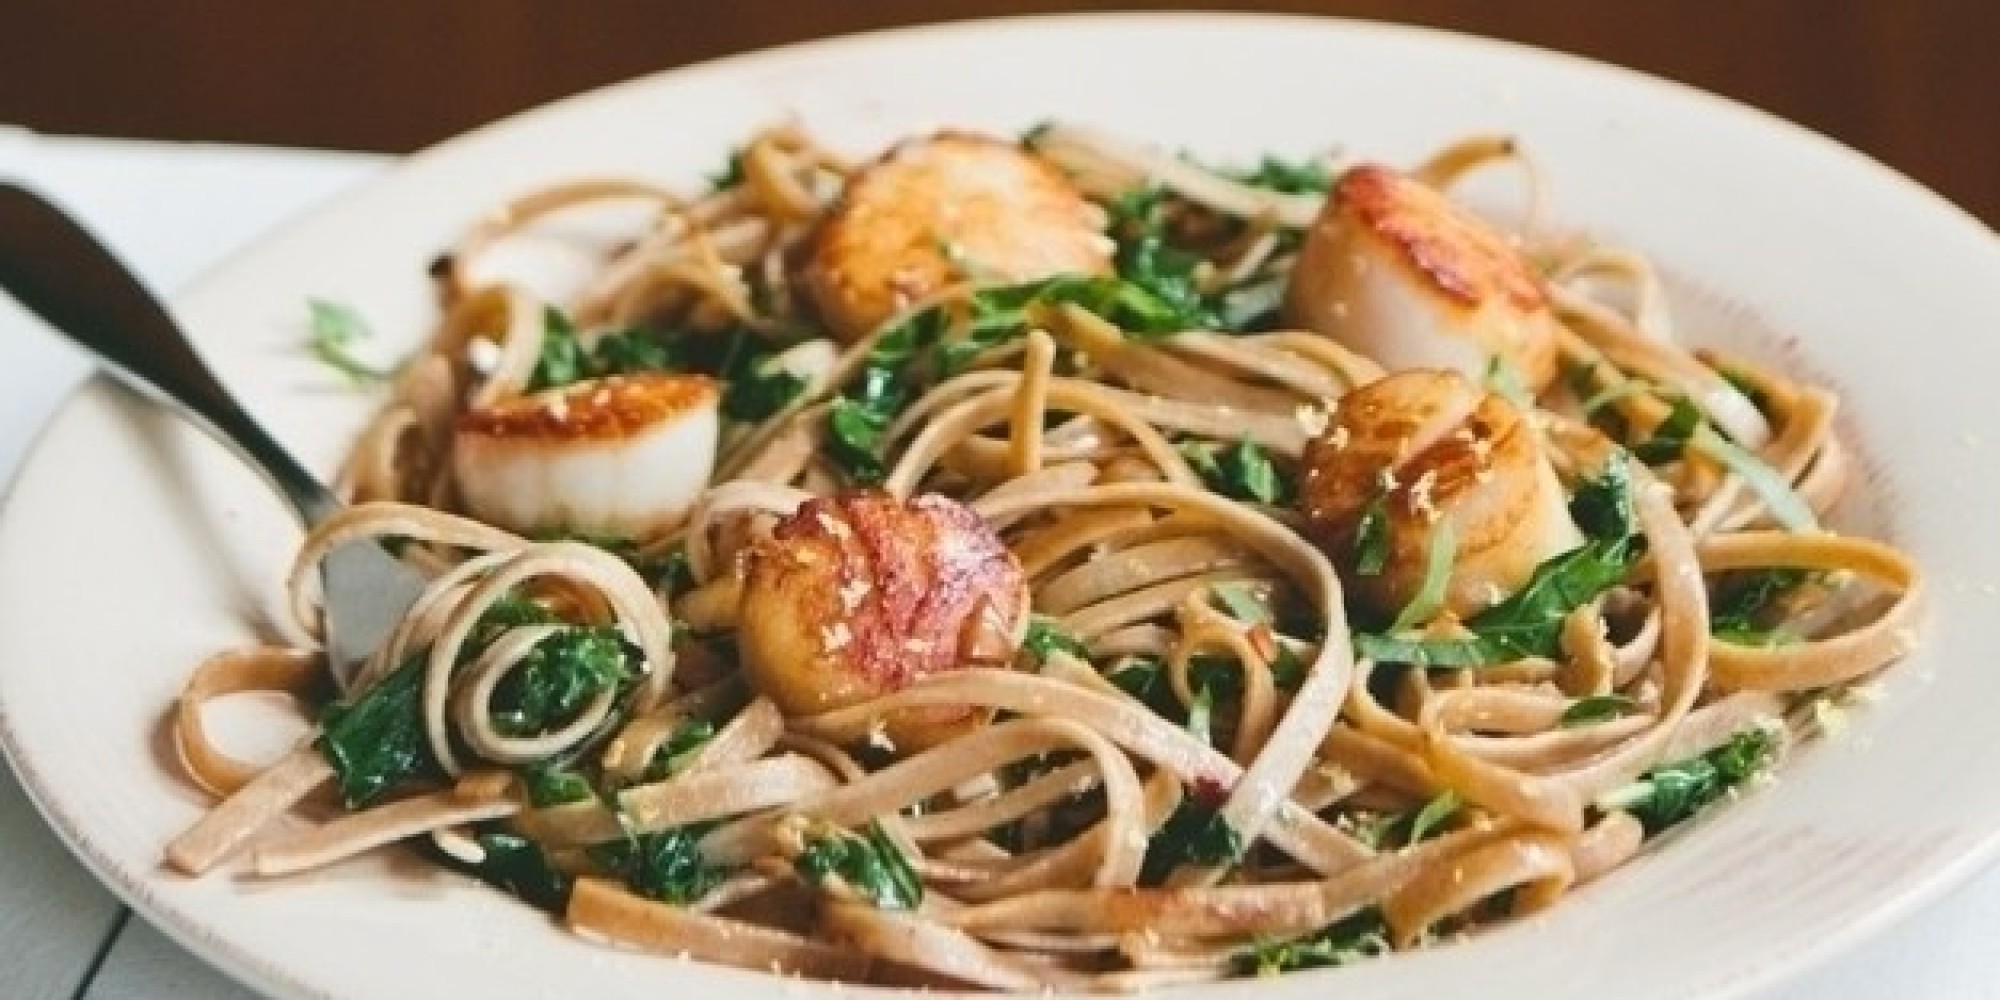 11 Romantic Dinner Ideas For Two (Hold The Garlic)